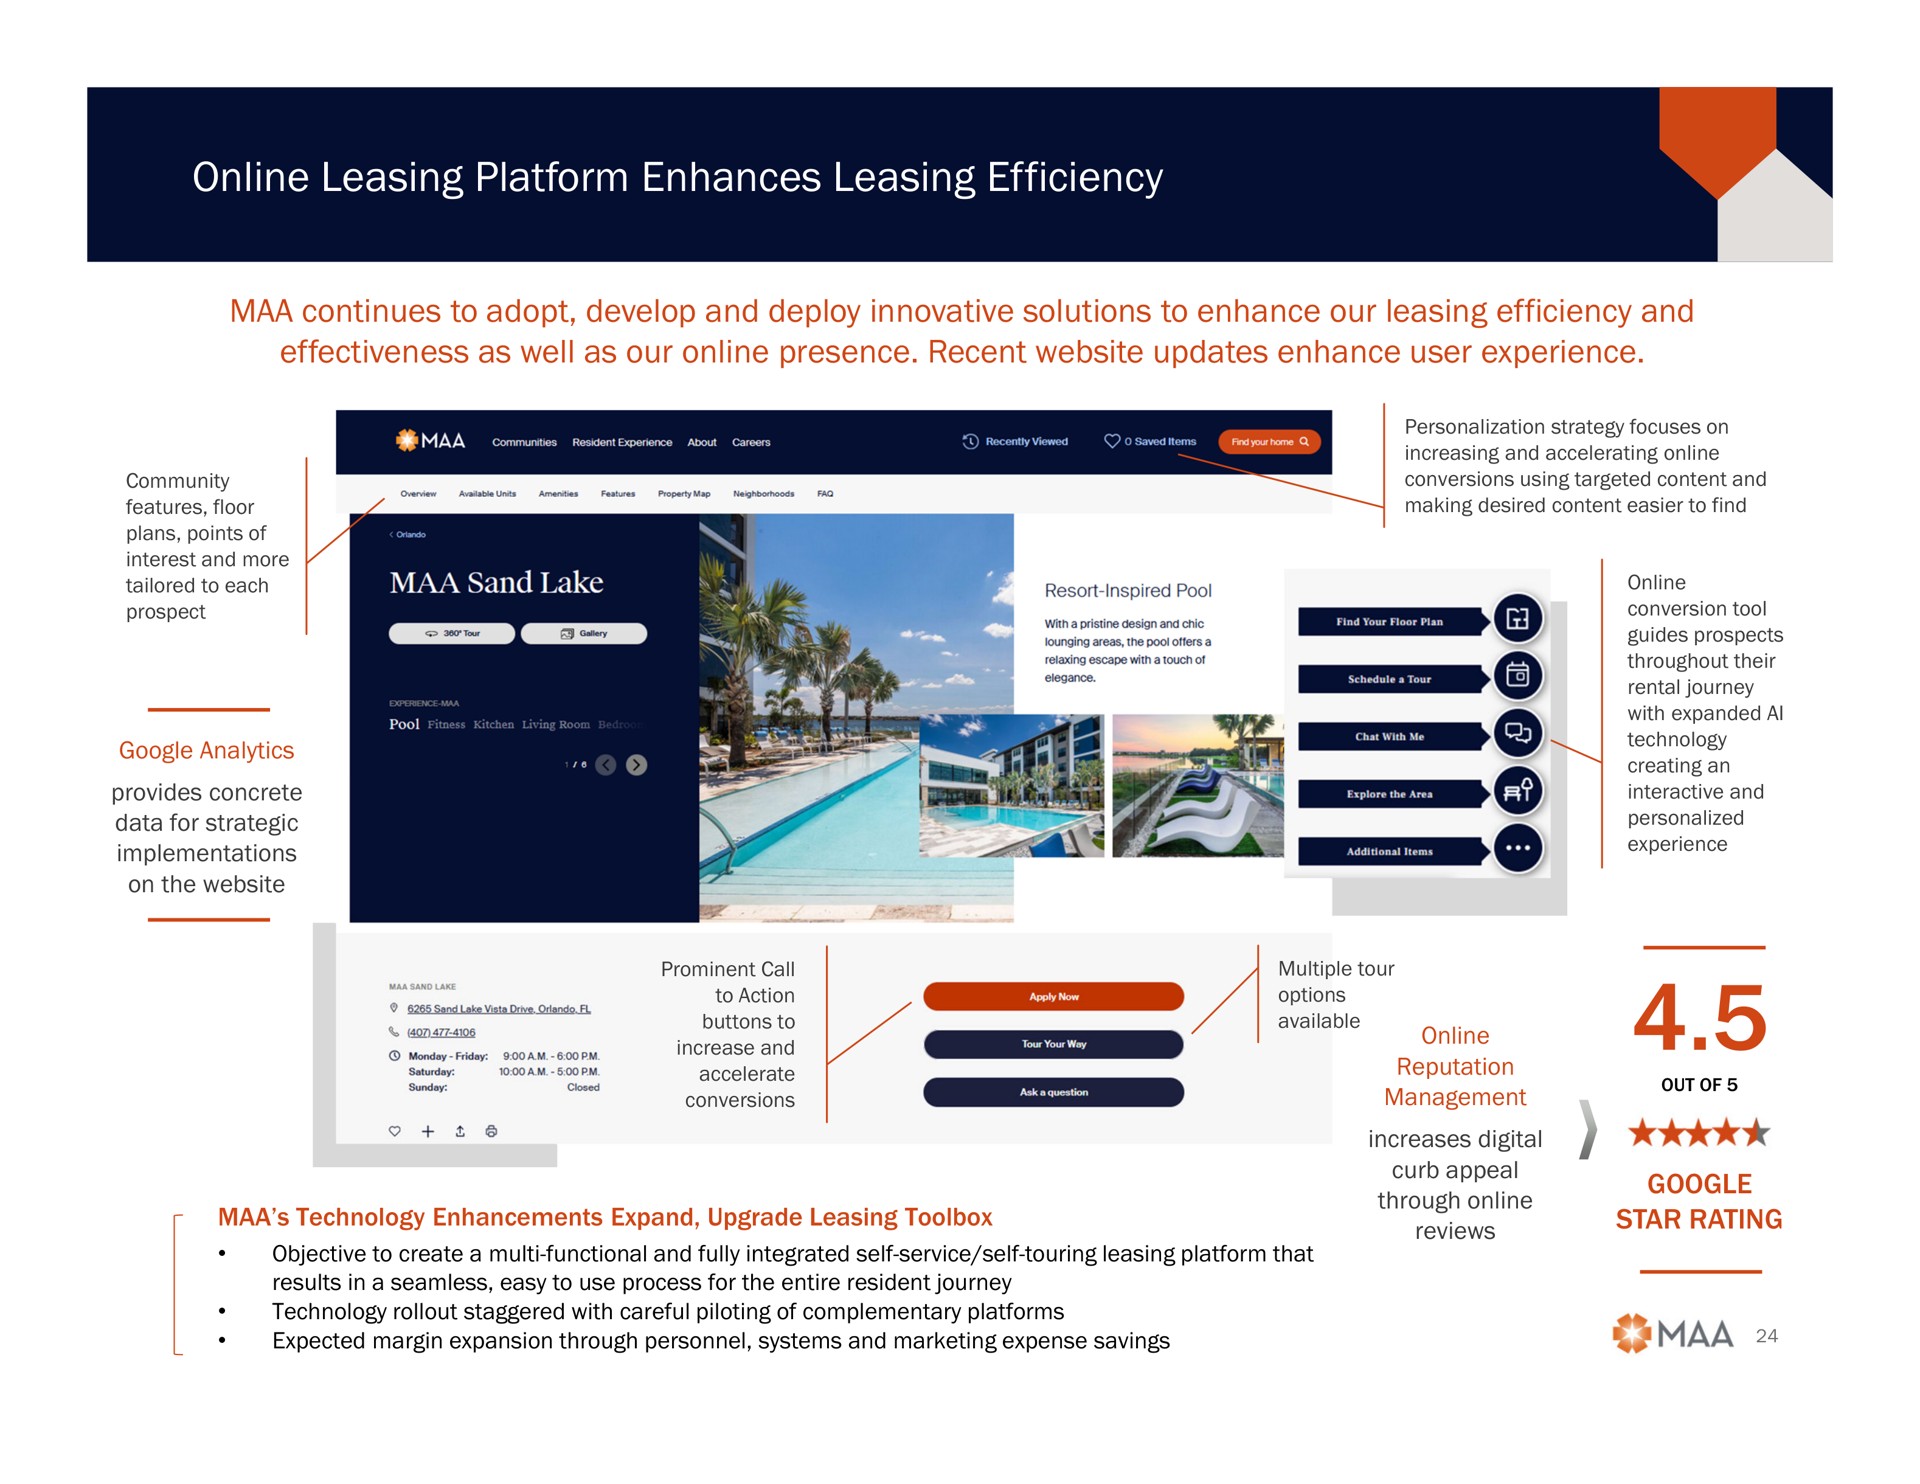 leasing platform enhances leasing efficiency continues to adopt develop and deploy innovative solutions to enhance our leasing efficiency and effectiveness as well as our presence recent updates enhance user experience me guides prospects chicos action ged increase | Mid-America Apartment Communities